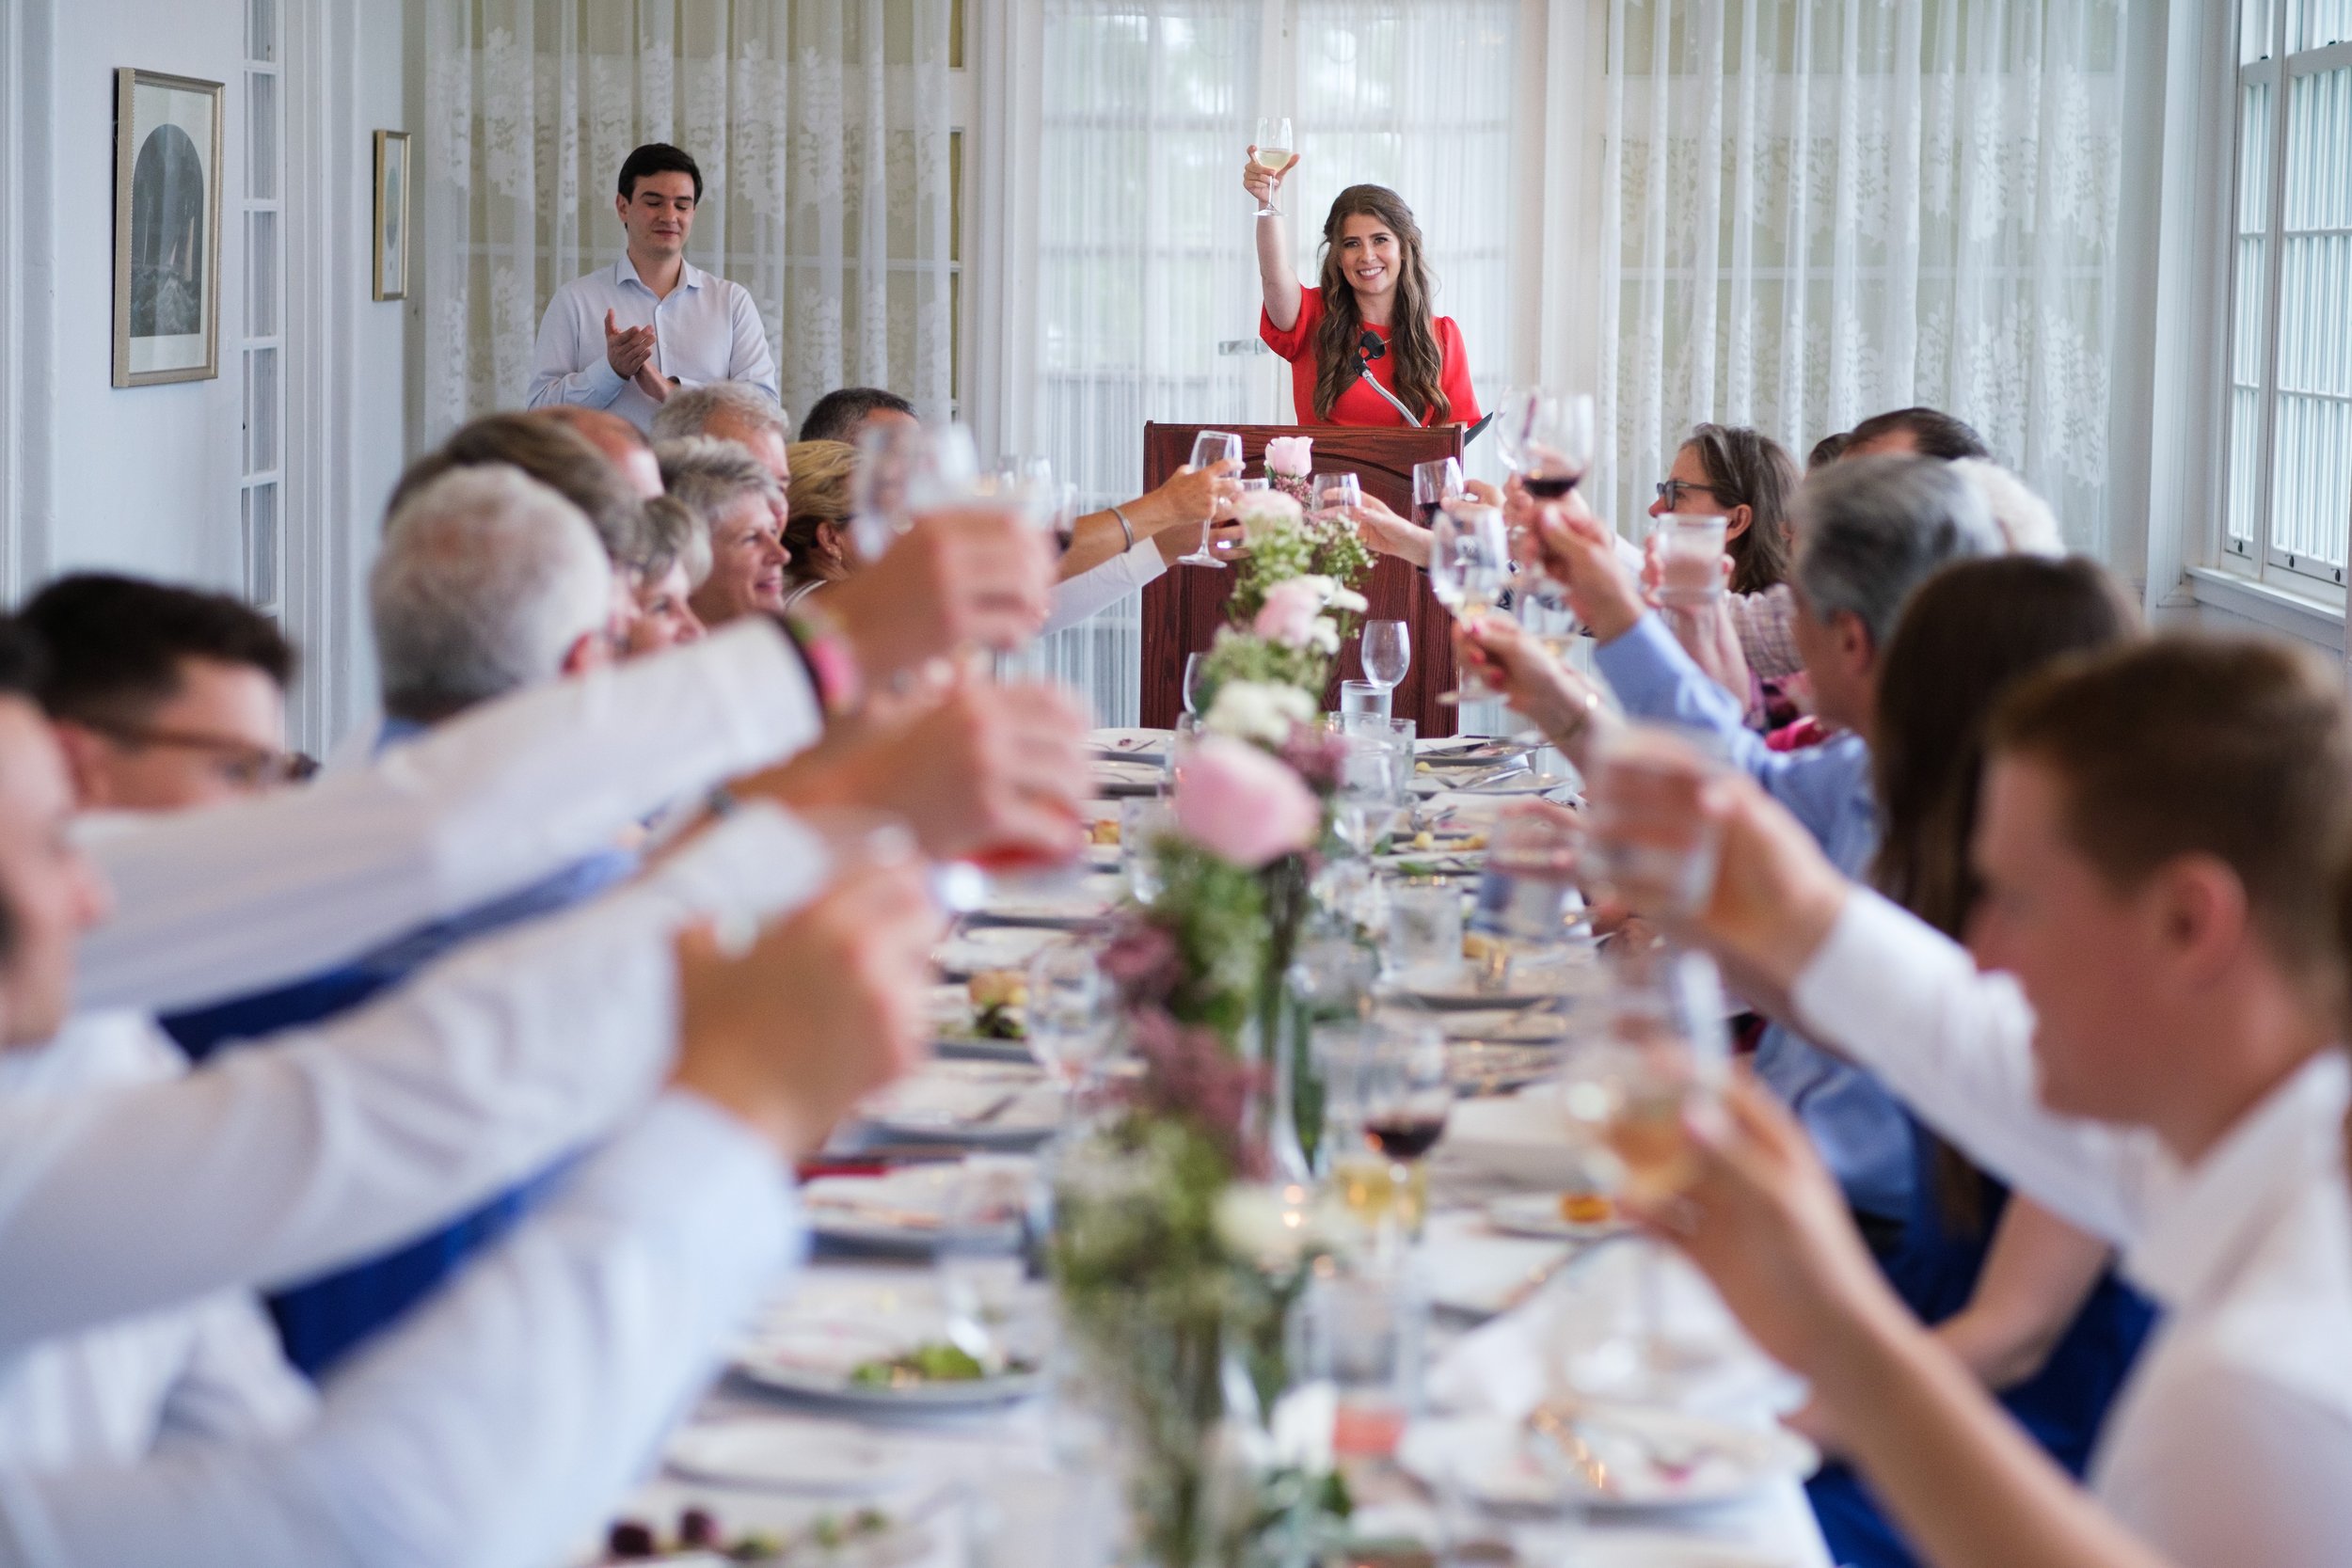  A colour wedding candid photograph of Geoff’s sister giving a wedding toast during the intimate dinner reception at the Royal Canadian Yacht Club by Toronto wedding photographer Scott Williams  